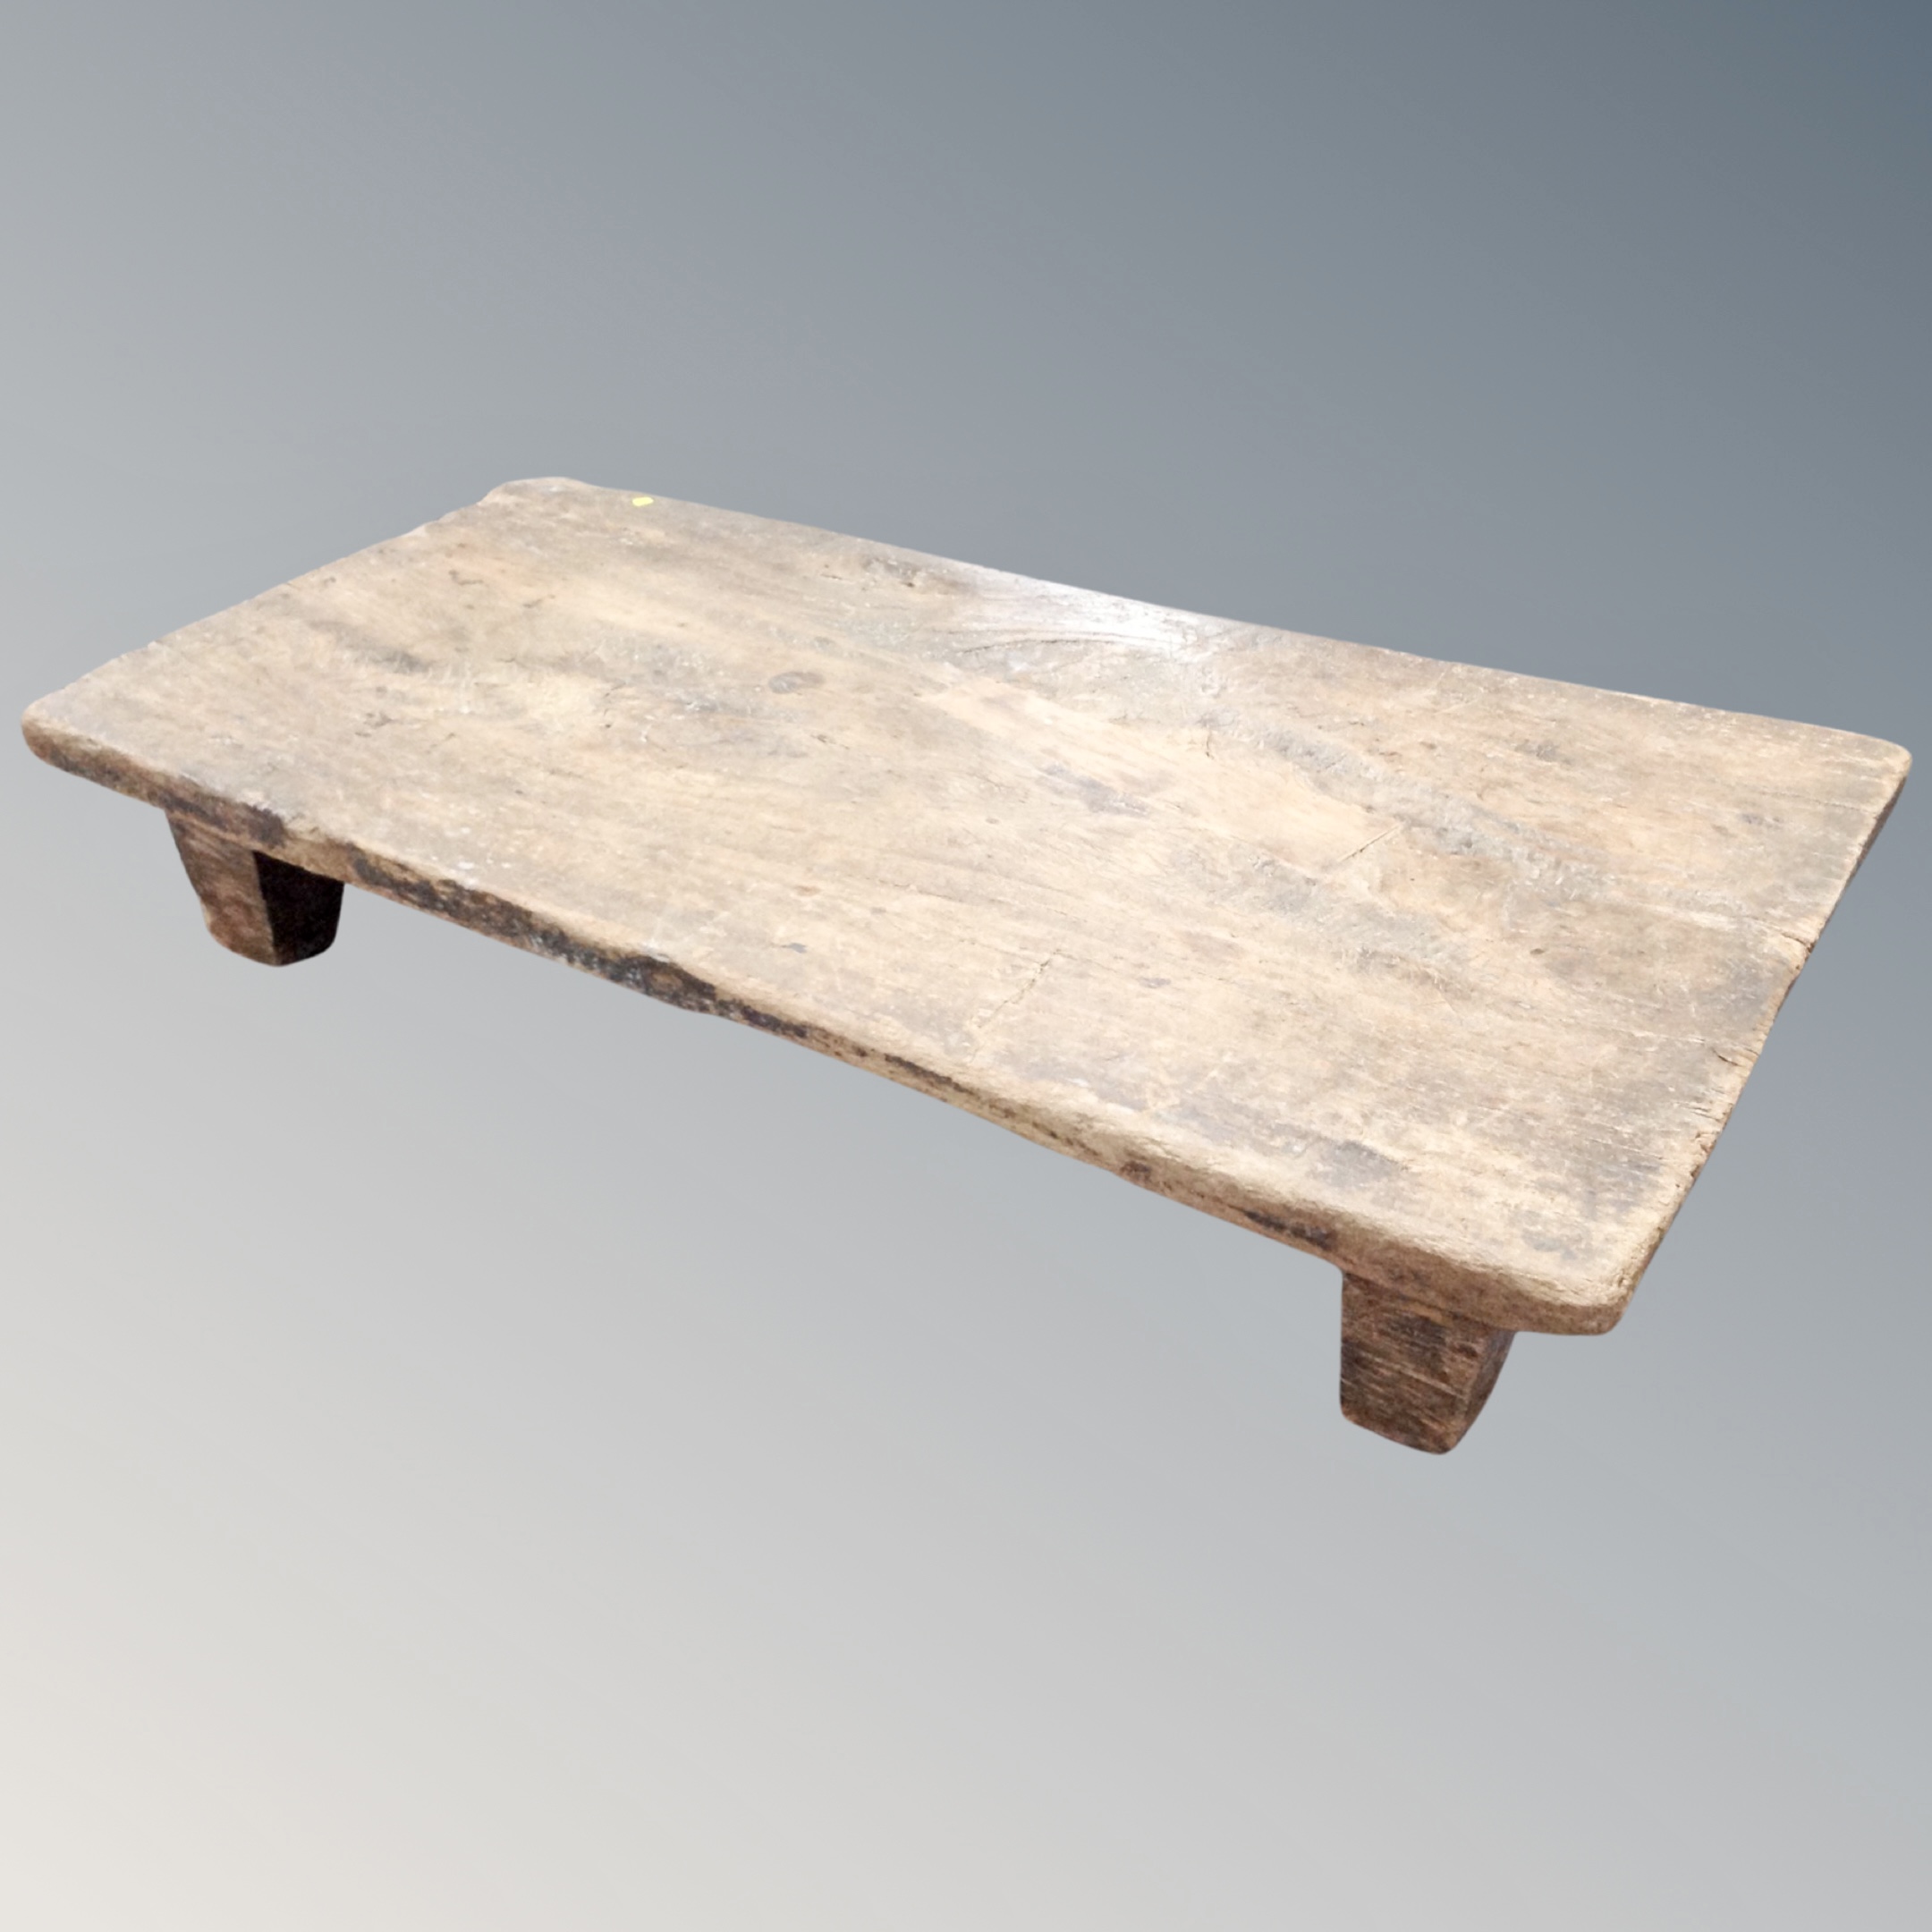 A rustic refectory coffee table